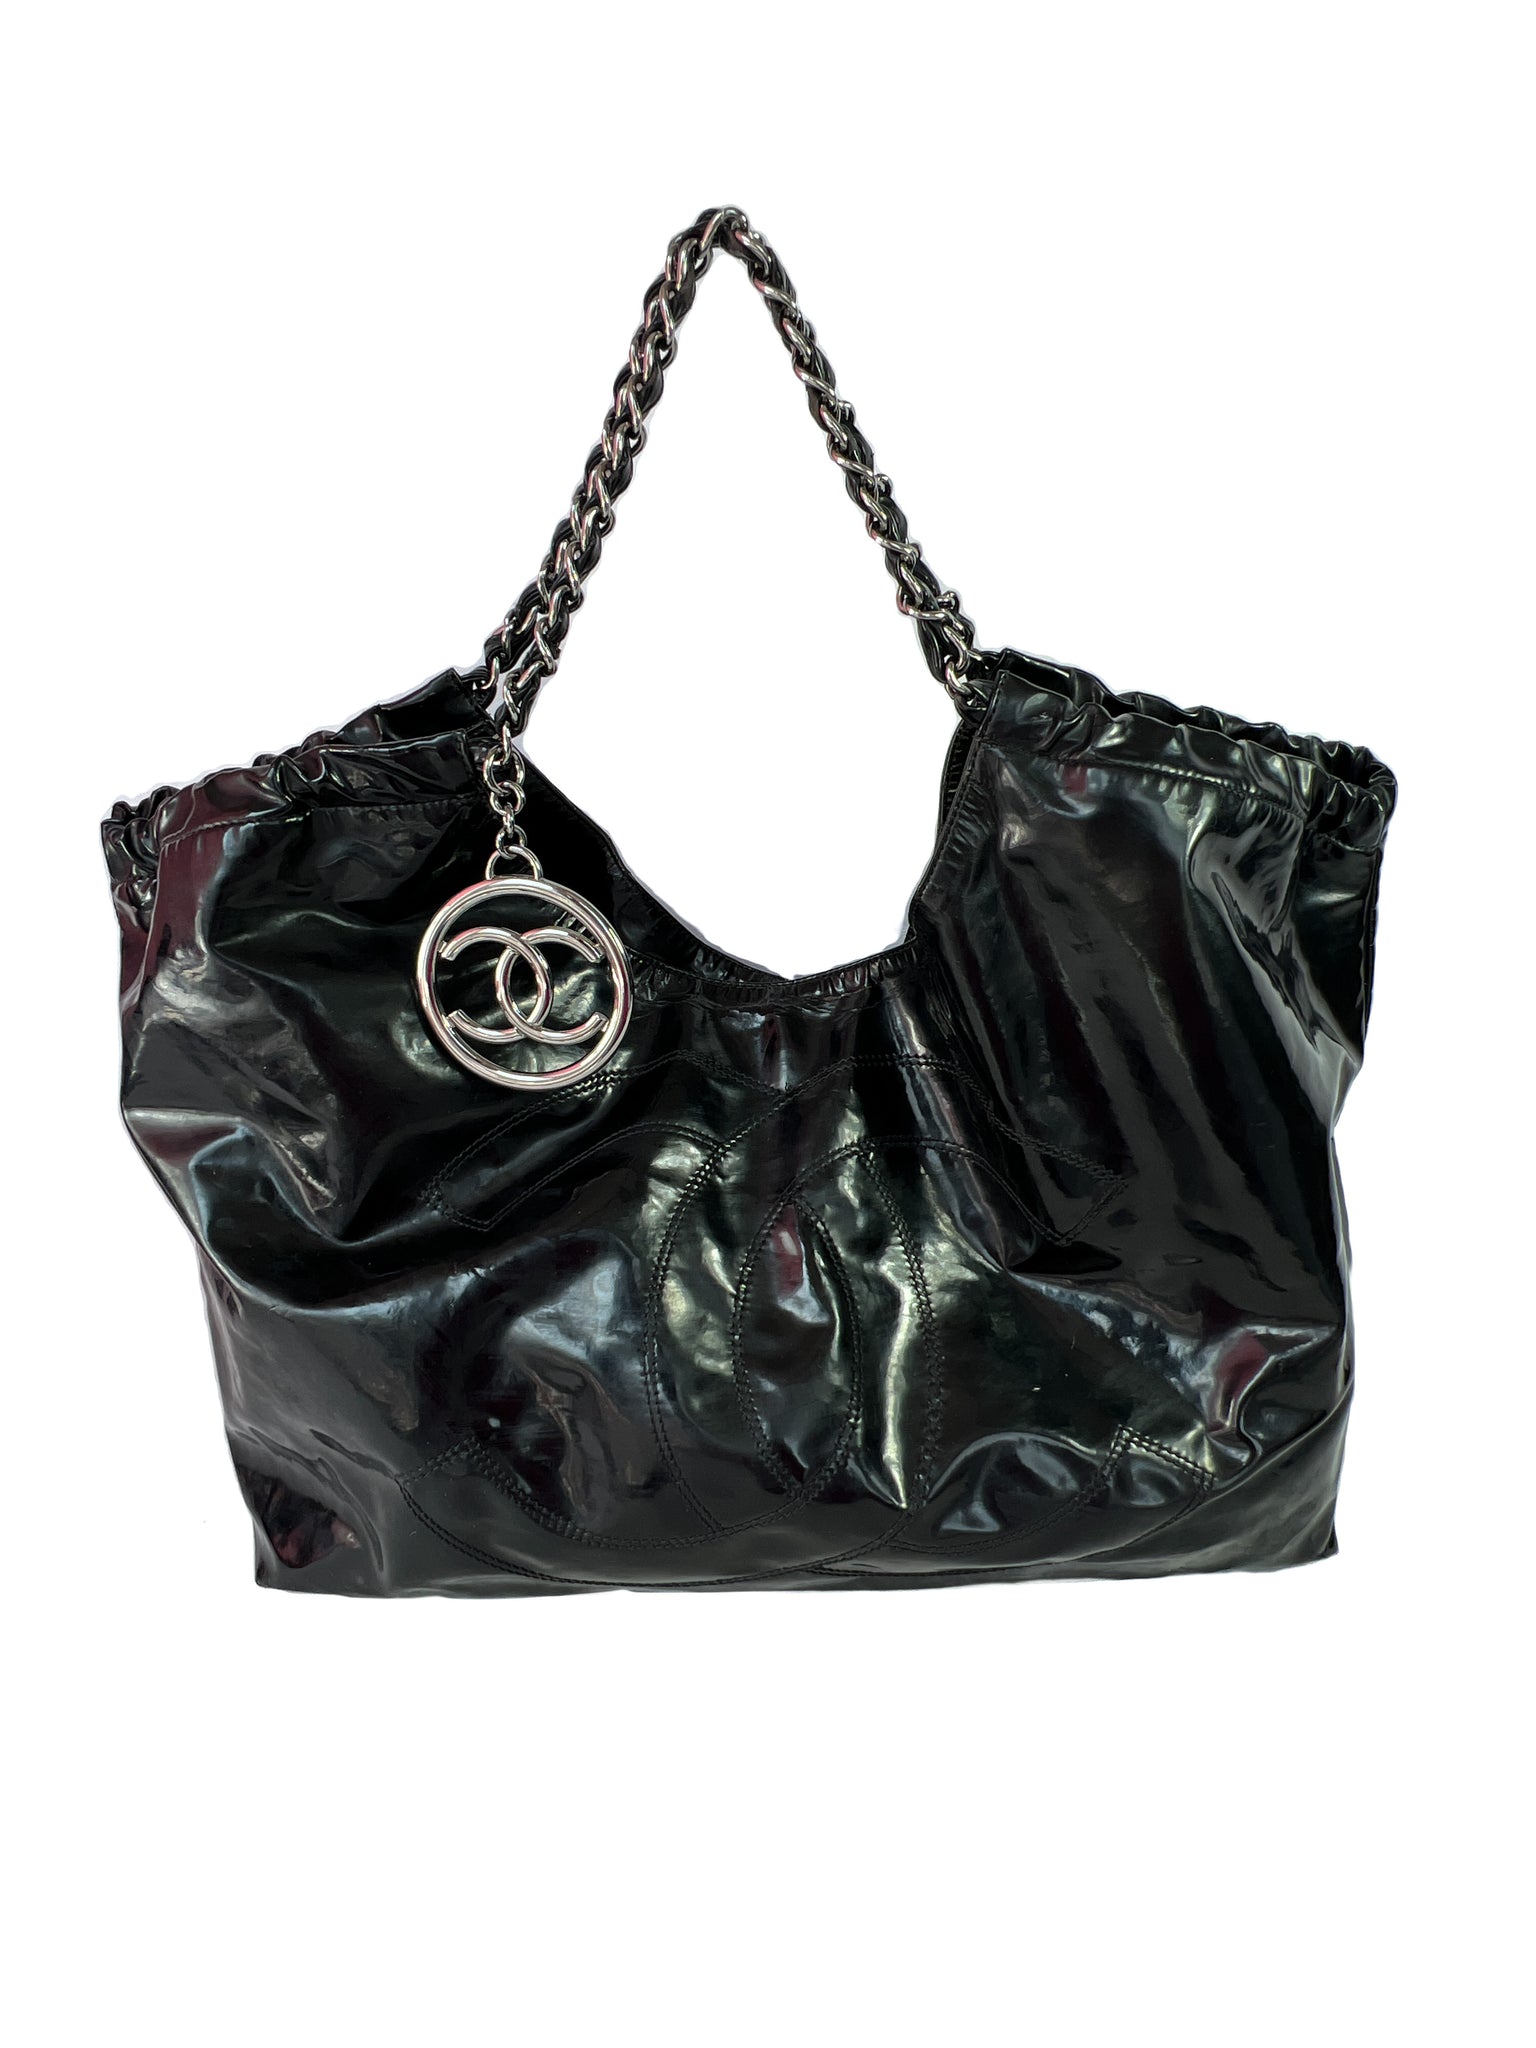 Chanel black patent leather coco Cabas tote AS IS – My